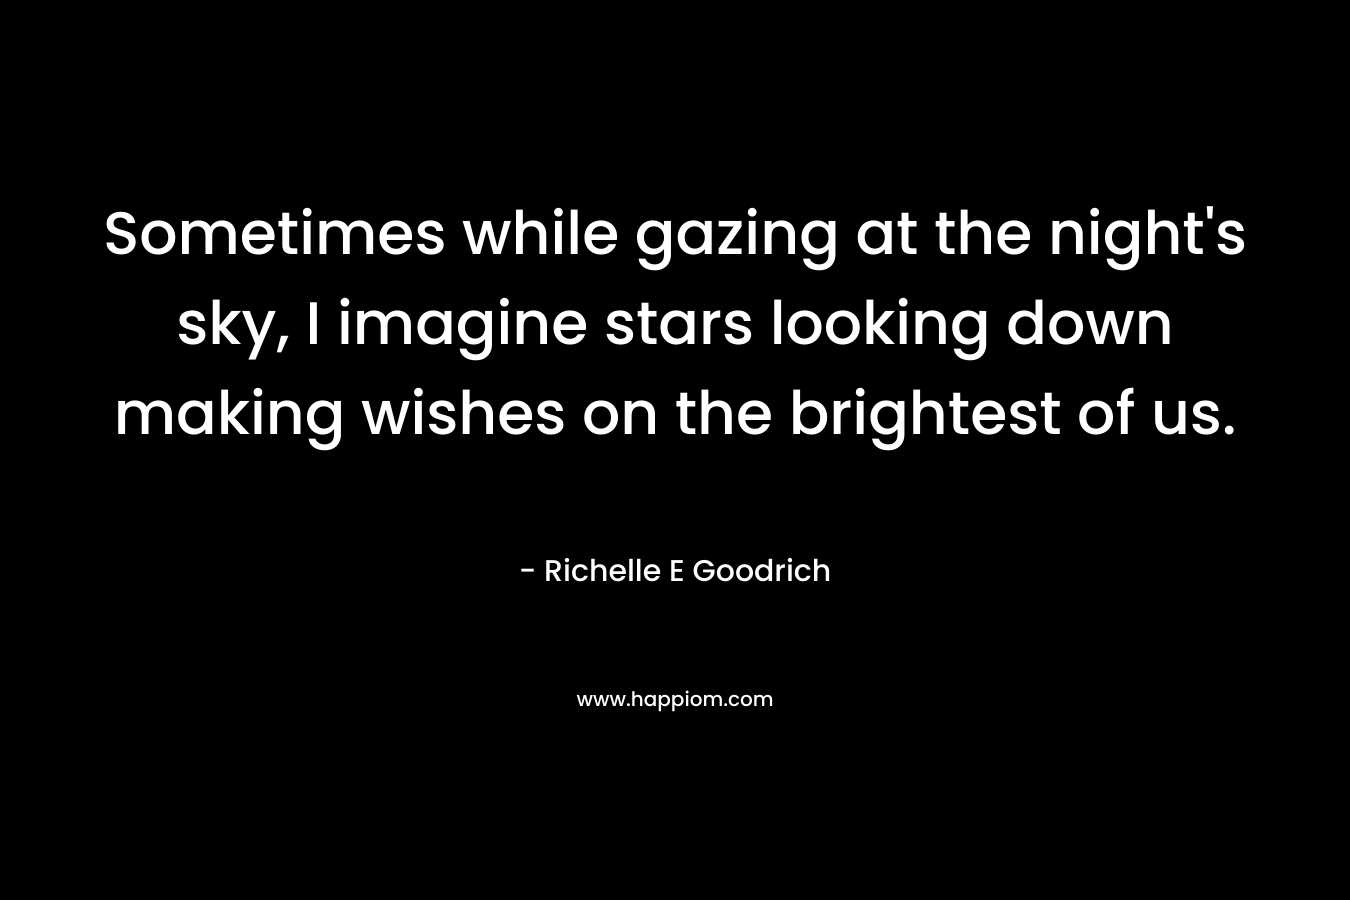 Sometimes while gazing at the night's sky, I imagine stars looking down making wishes on the brightest of us.